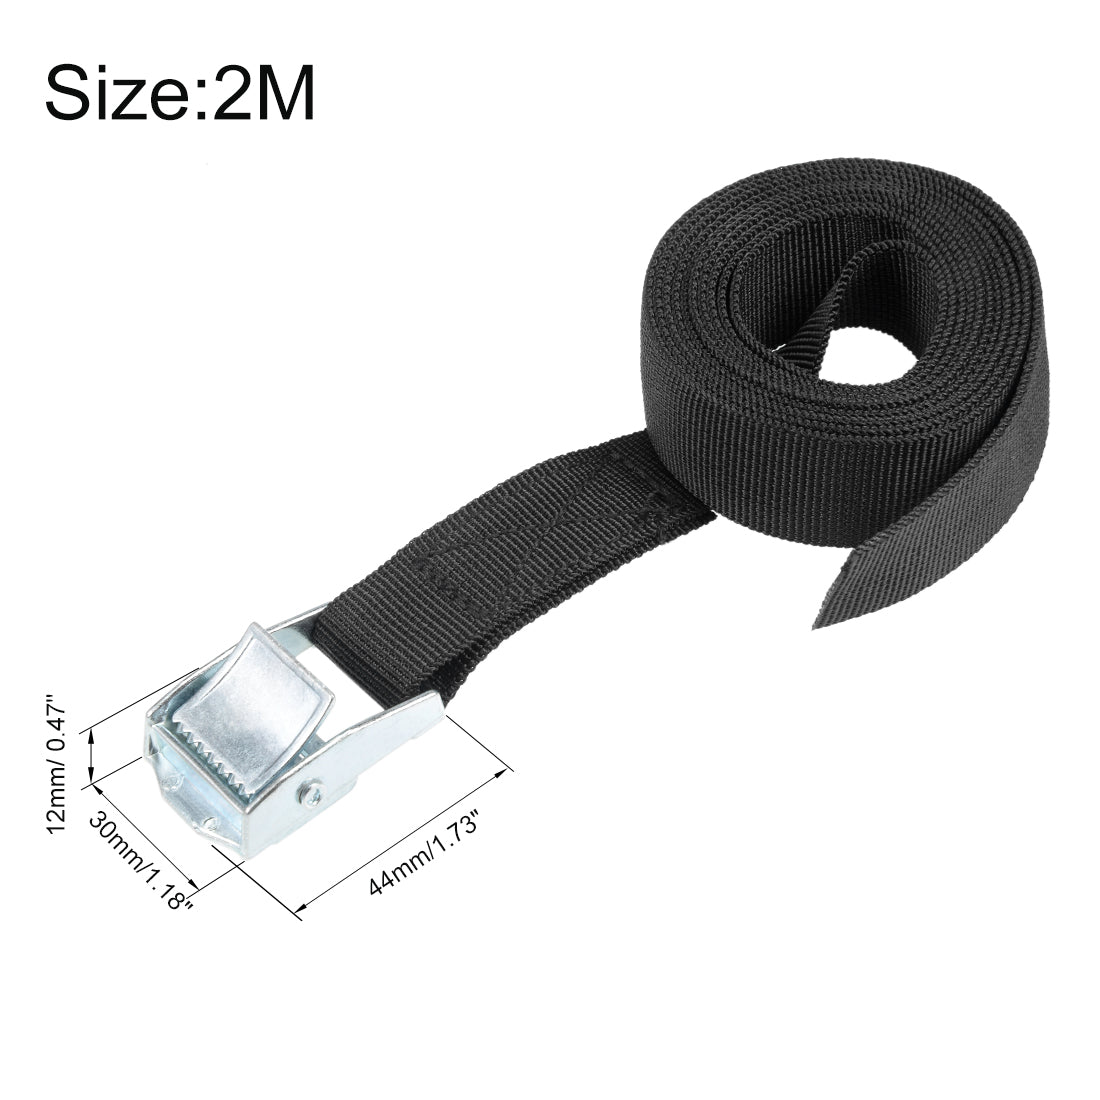 uxcell Uxcell 2M x 25mm Lashing Strap Cargo Tie Down Straps Buckle Up to 80Kg, Black, 4Pcs